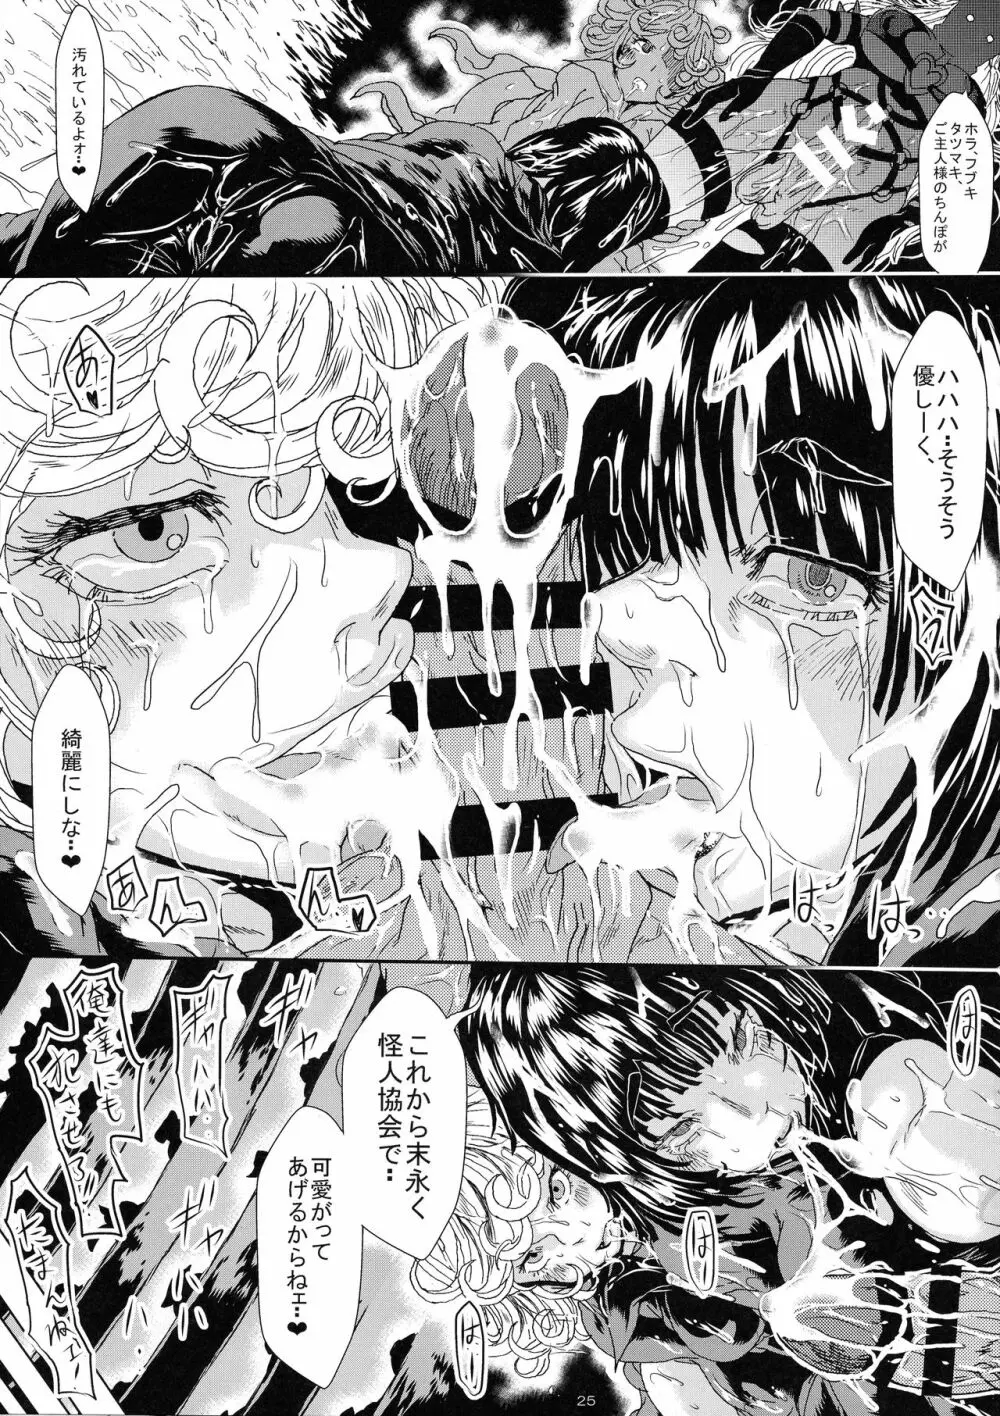 IN RAN-WOMEN2 怪人弩Sに敗北した姉妹 - page25